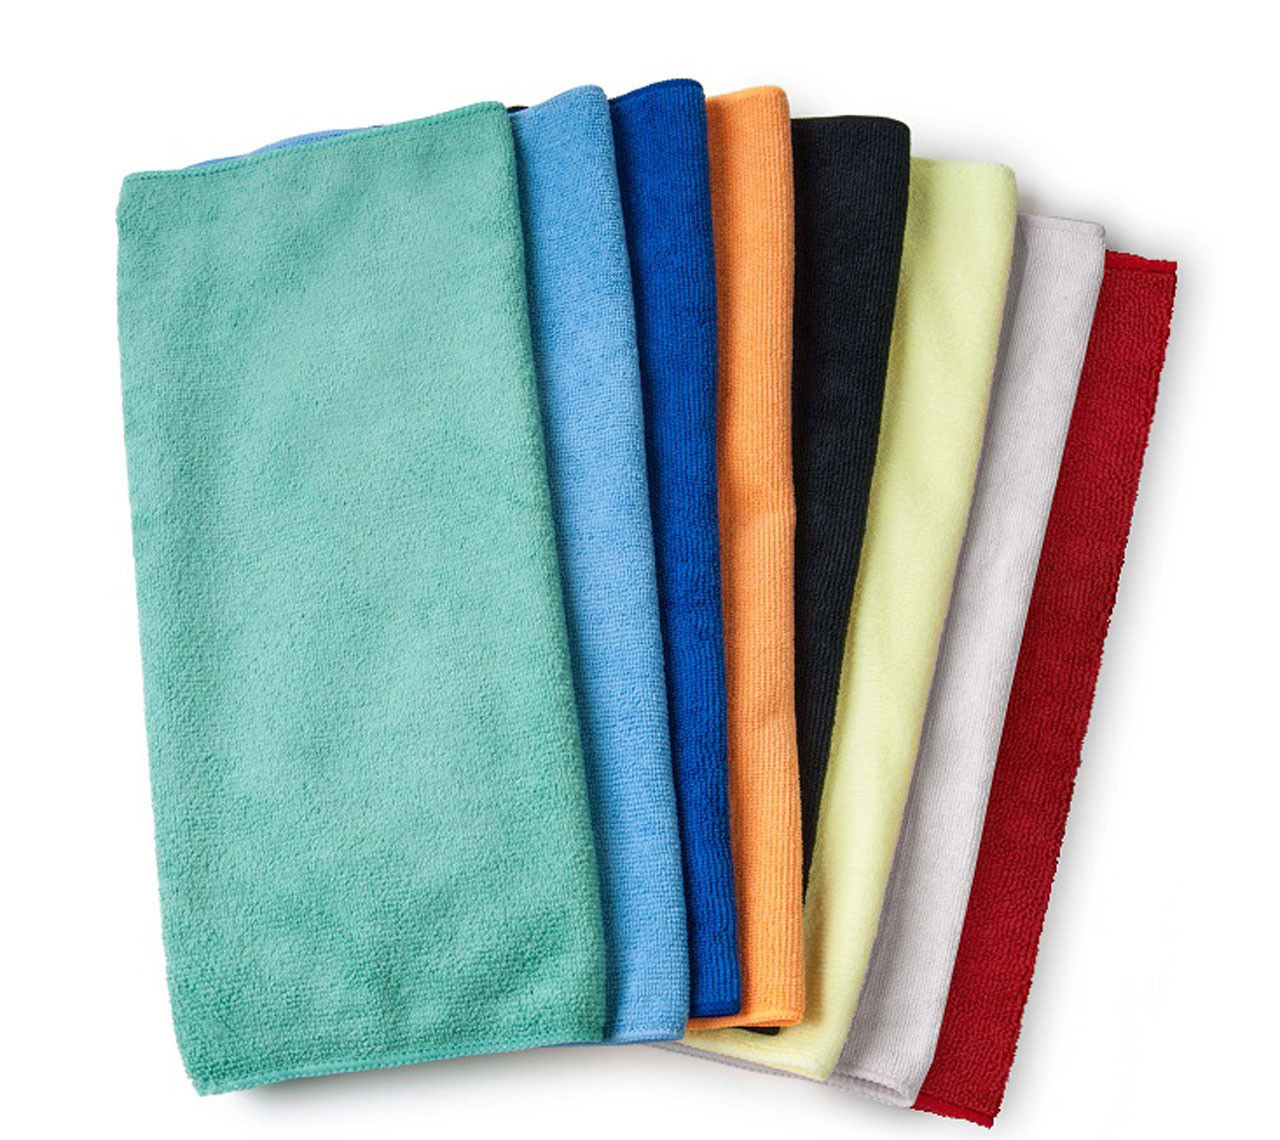 How many 300gsm microfiber towels come in a case?